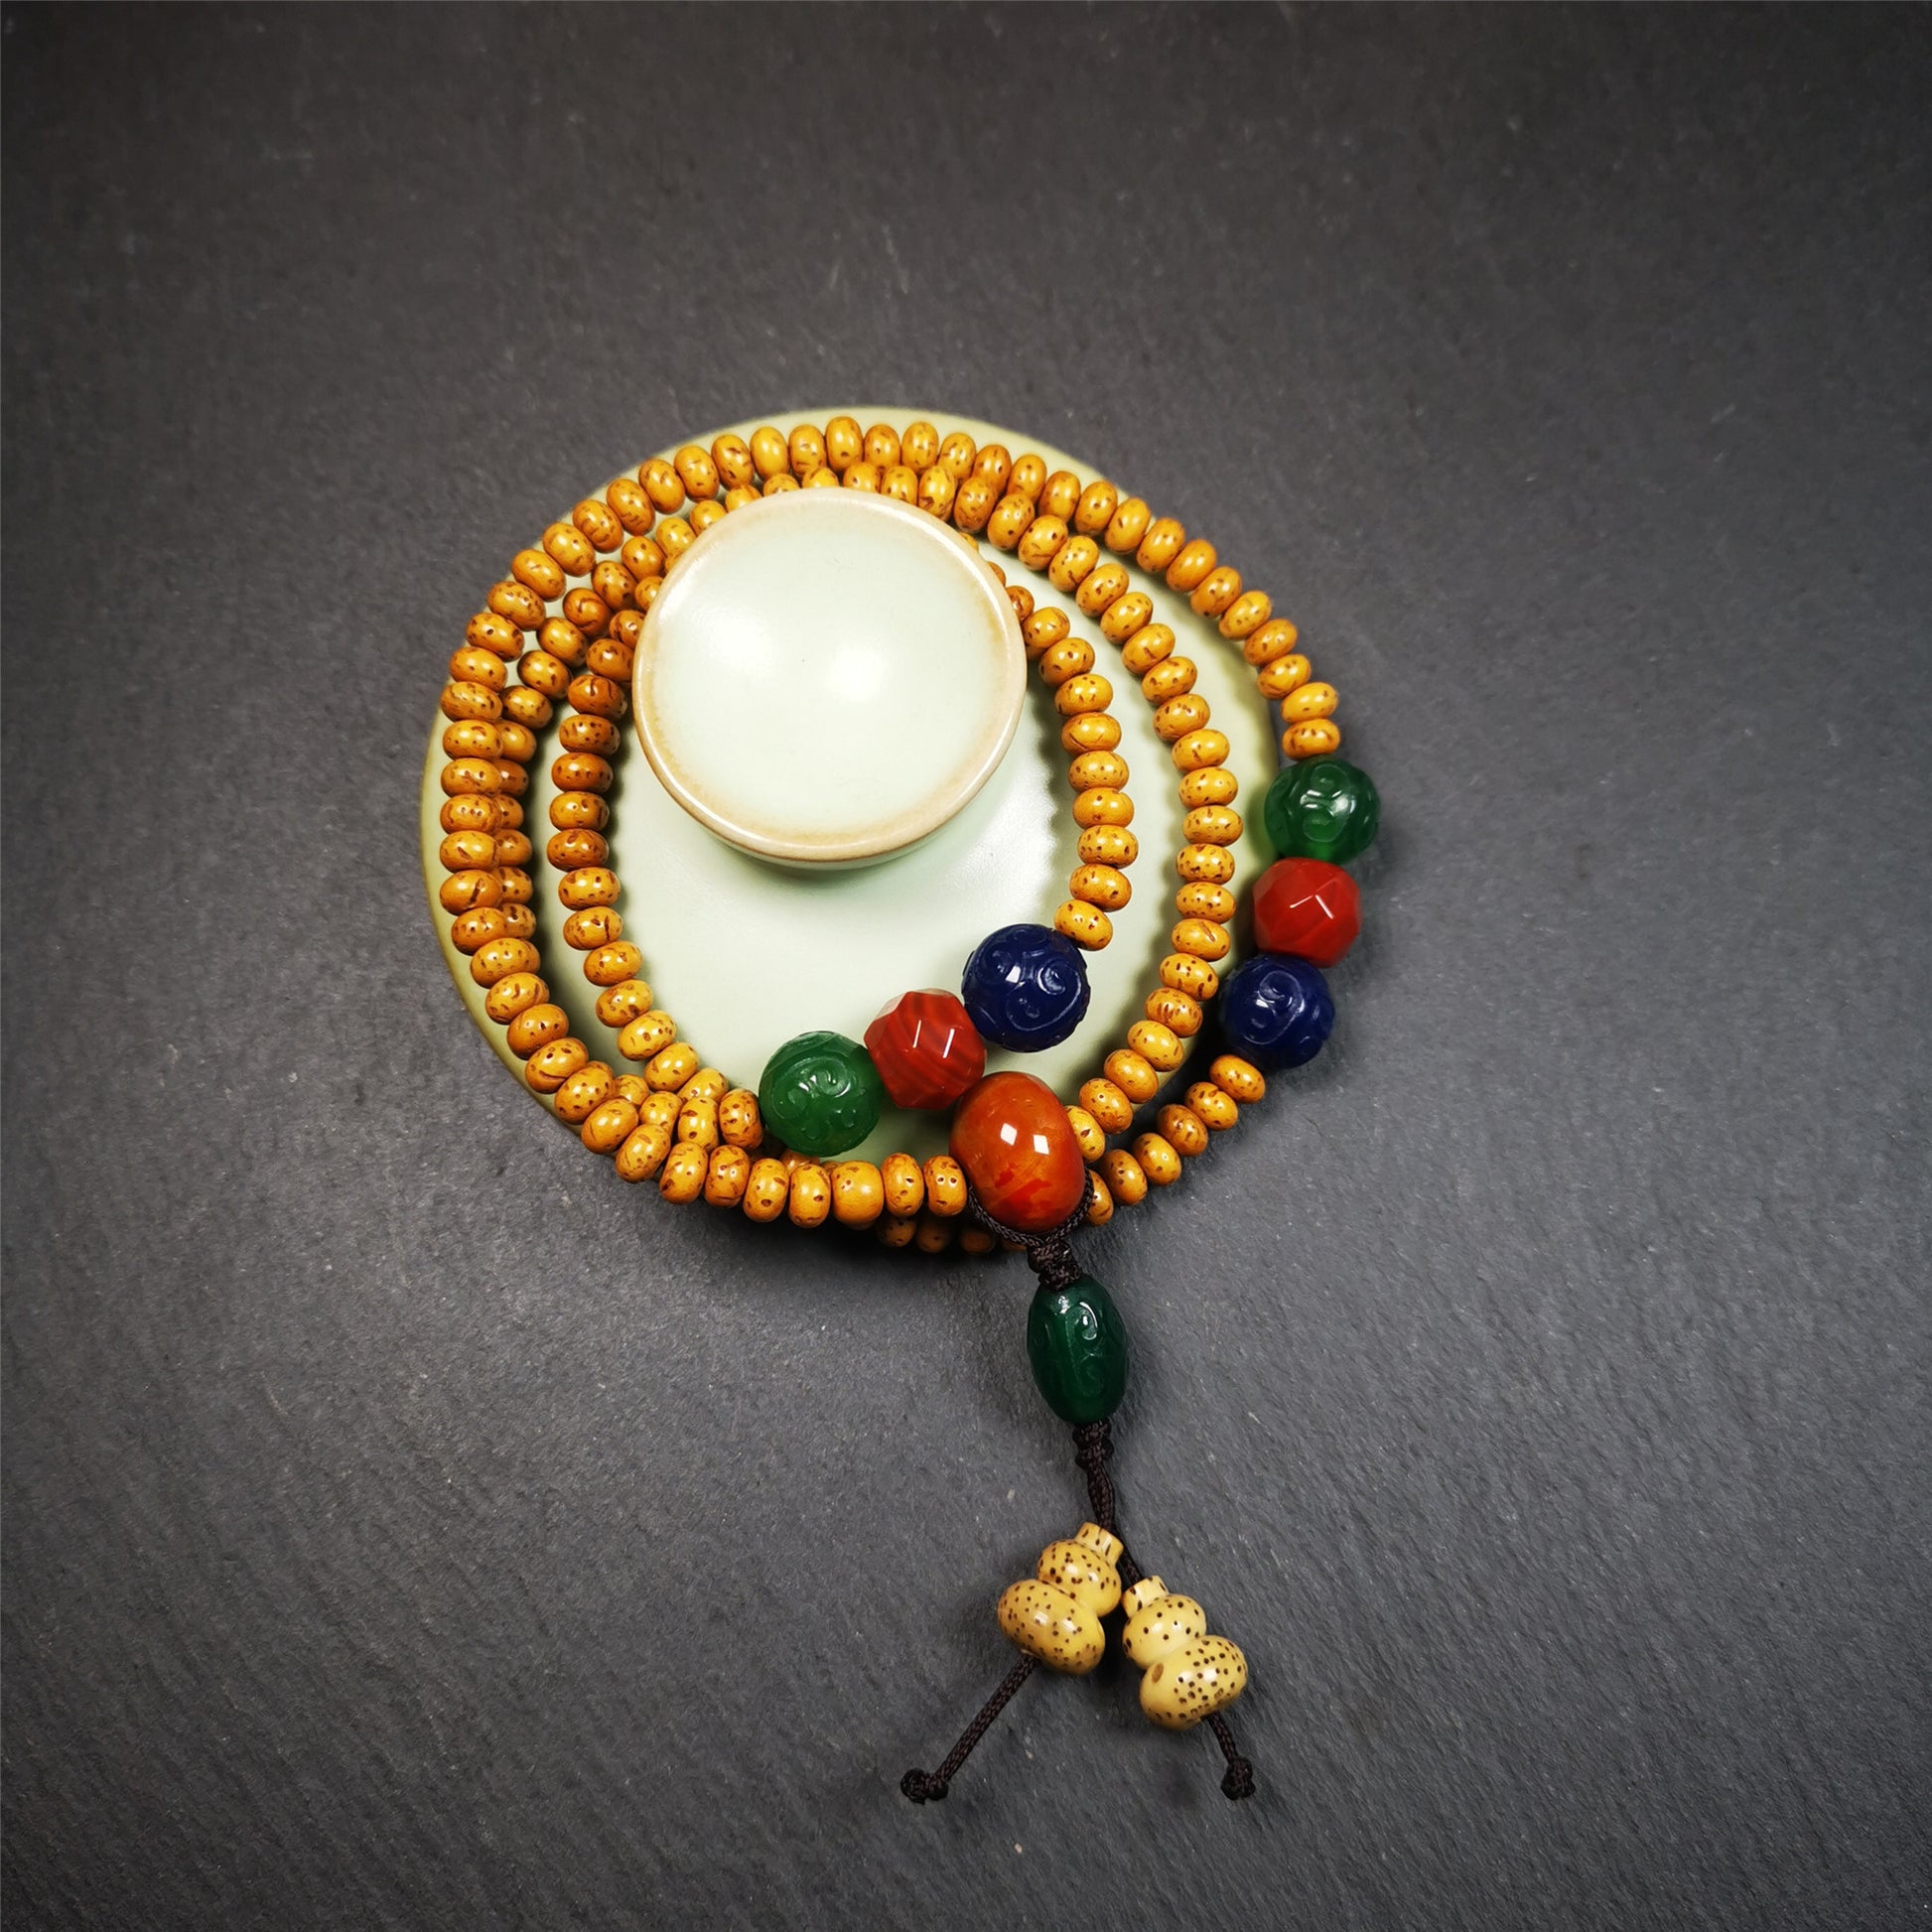 This mala is made by Tibetan craftsmen. It is composed of 108 lotus seed beads(5mm / 0.2"),perimeter is about 56cm,22inches.equipped with red, blue and green agates, very elegant.  It is worn with an elastic cord, so it fits the wrist very well, suitable for women to use as a bracelet mala